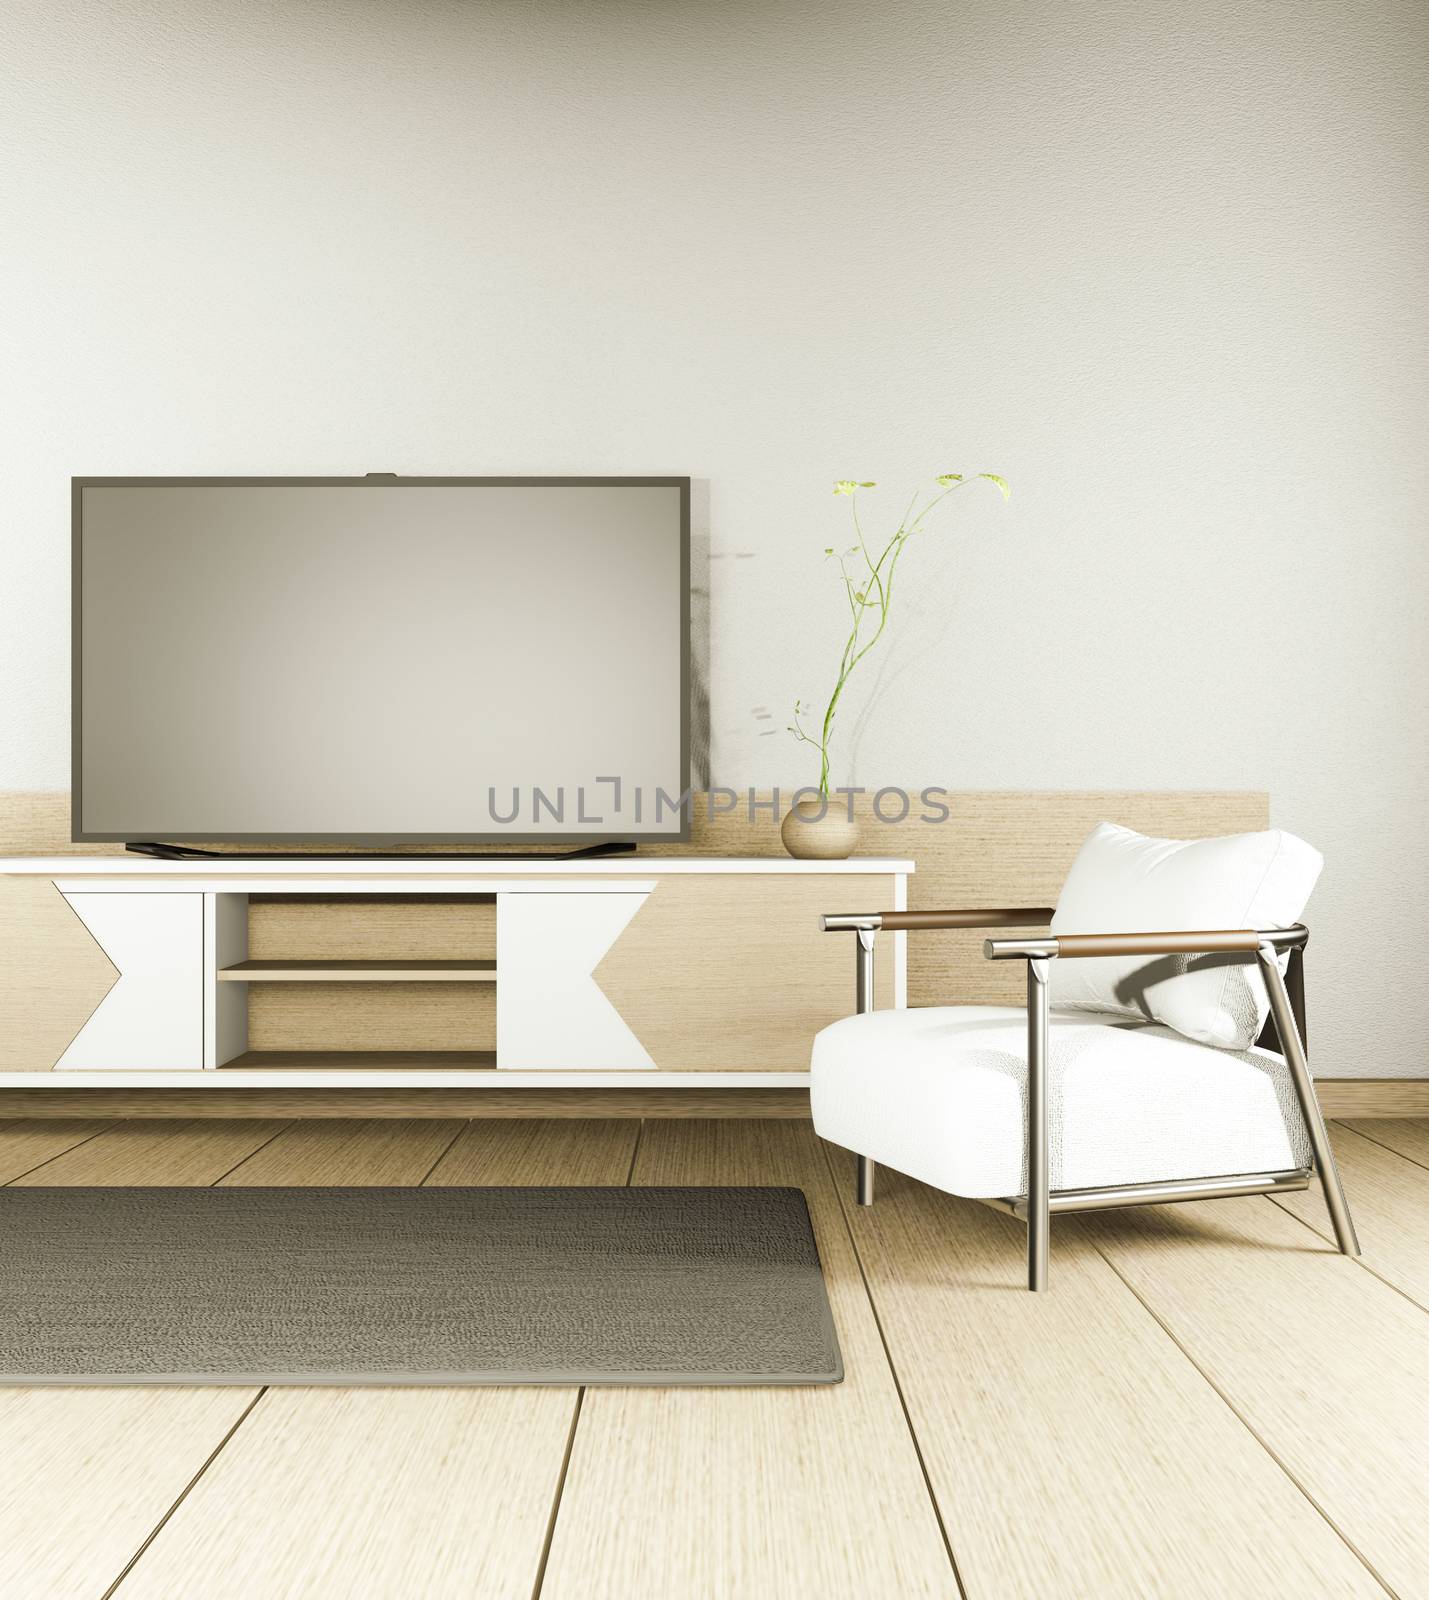 TV cabinet and display japanese interior of living room and the black background for editing. 3d rendering